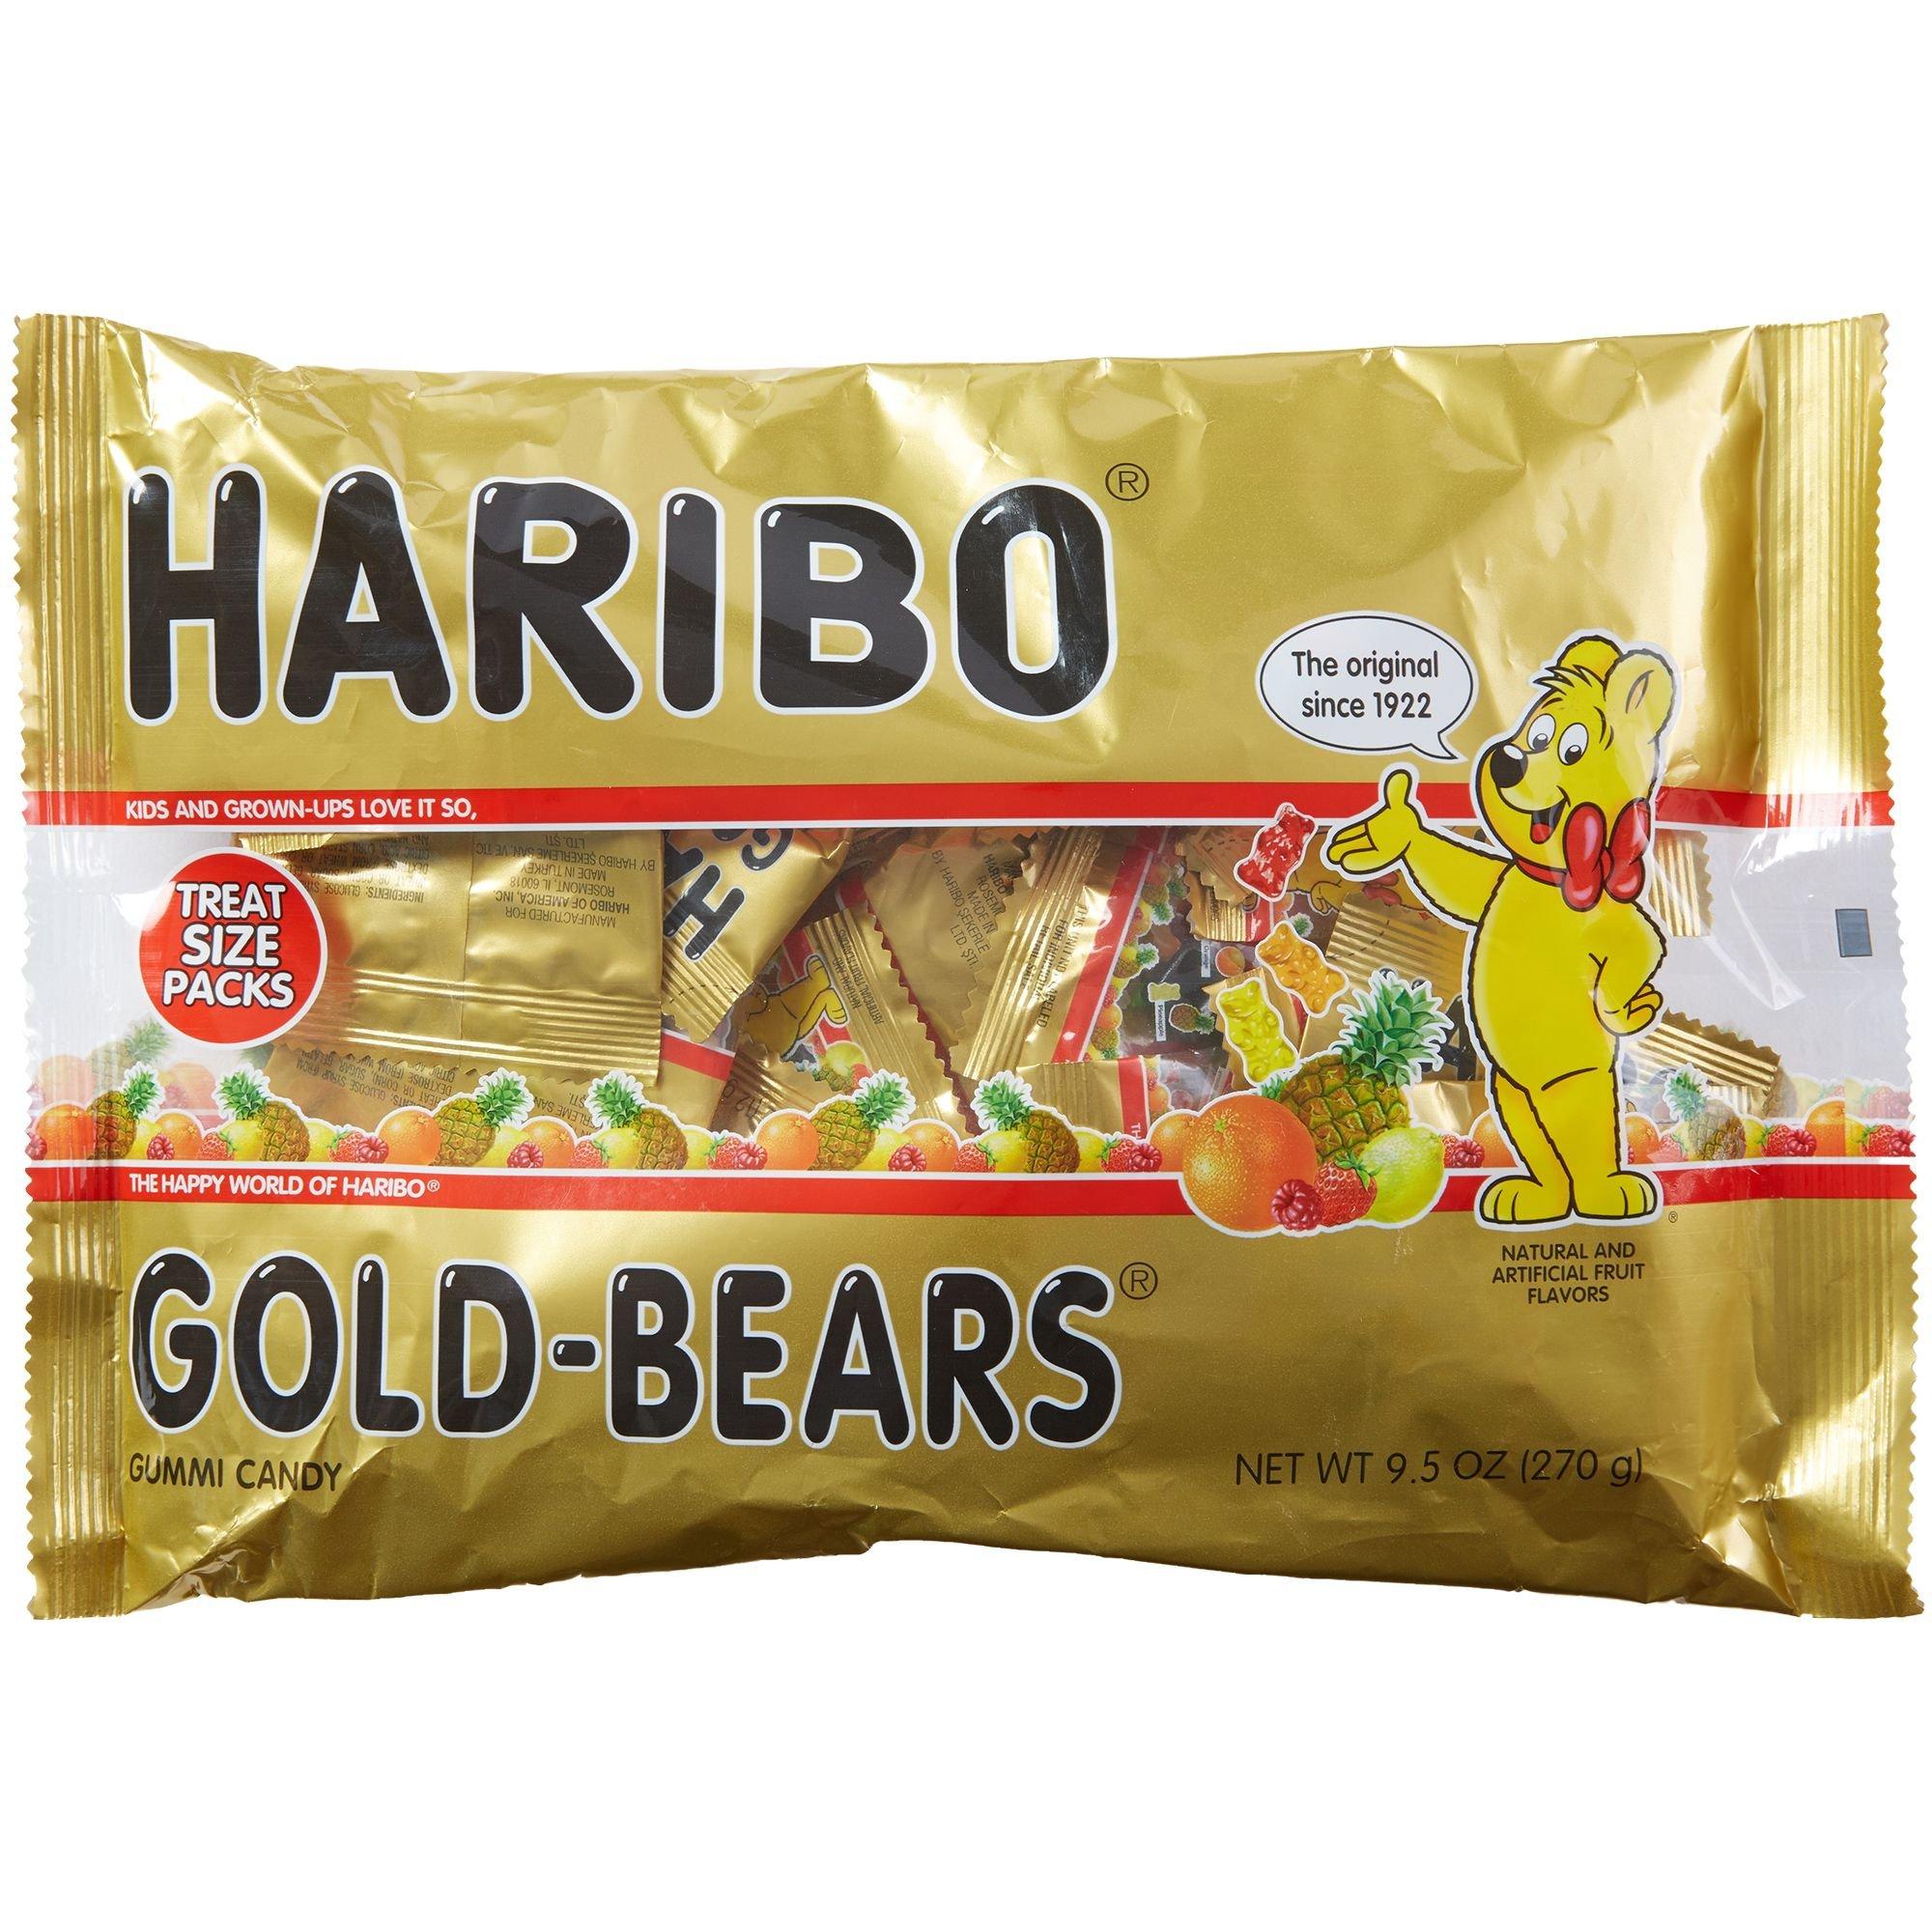 Food Haribo Gold Bears 100 mini bags from wholesale and import